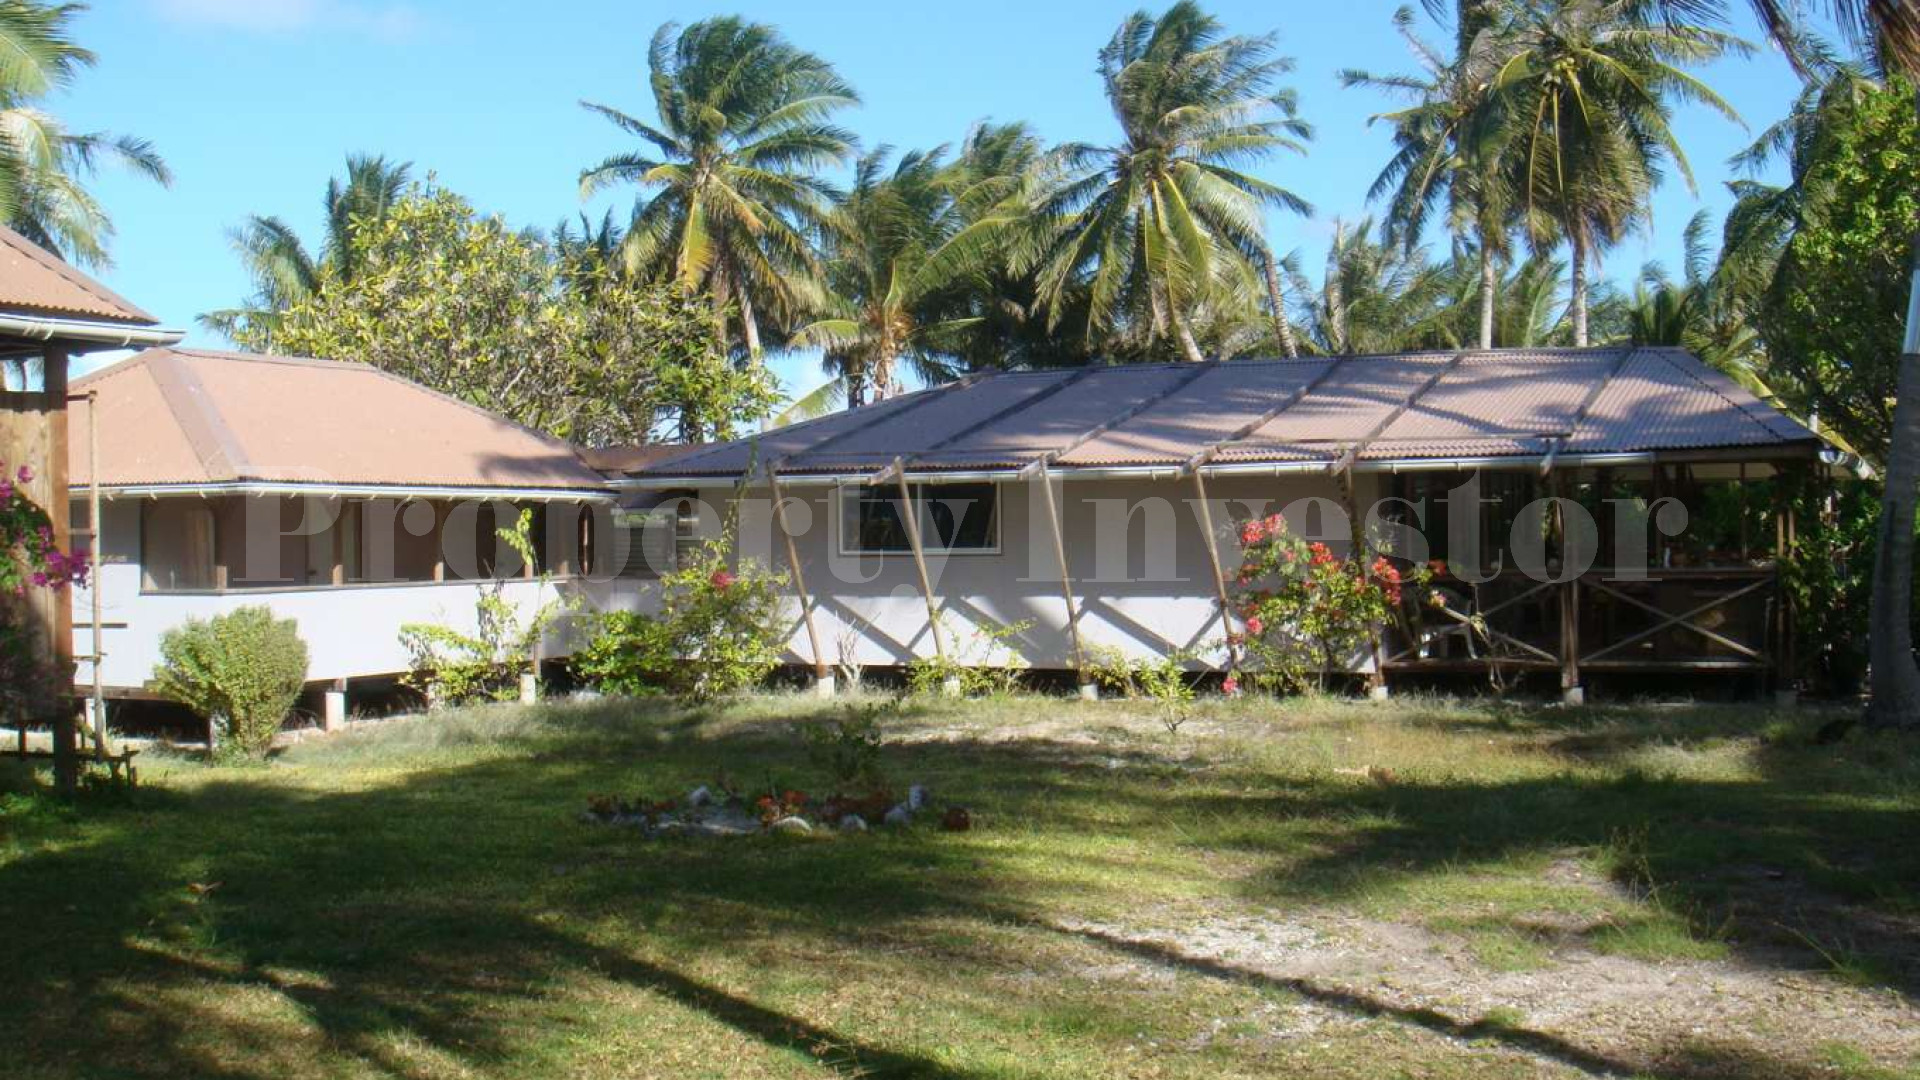 3.36 Hectare Private Boutique Island Retreat with 5 Bungalows in French Polynesia